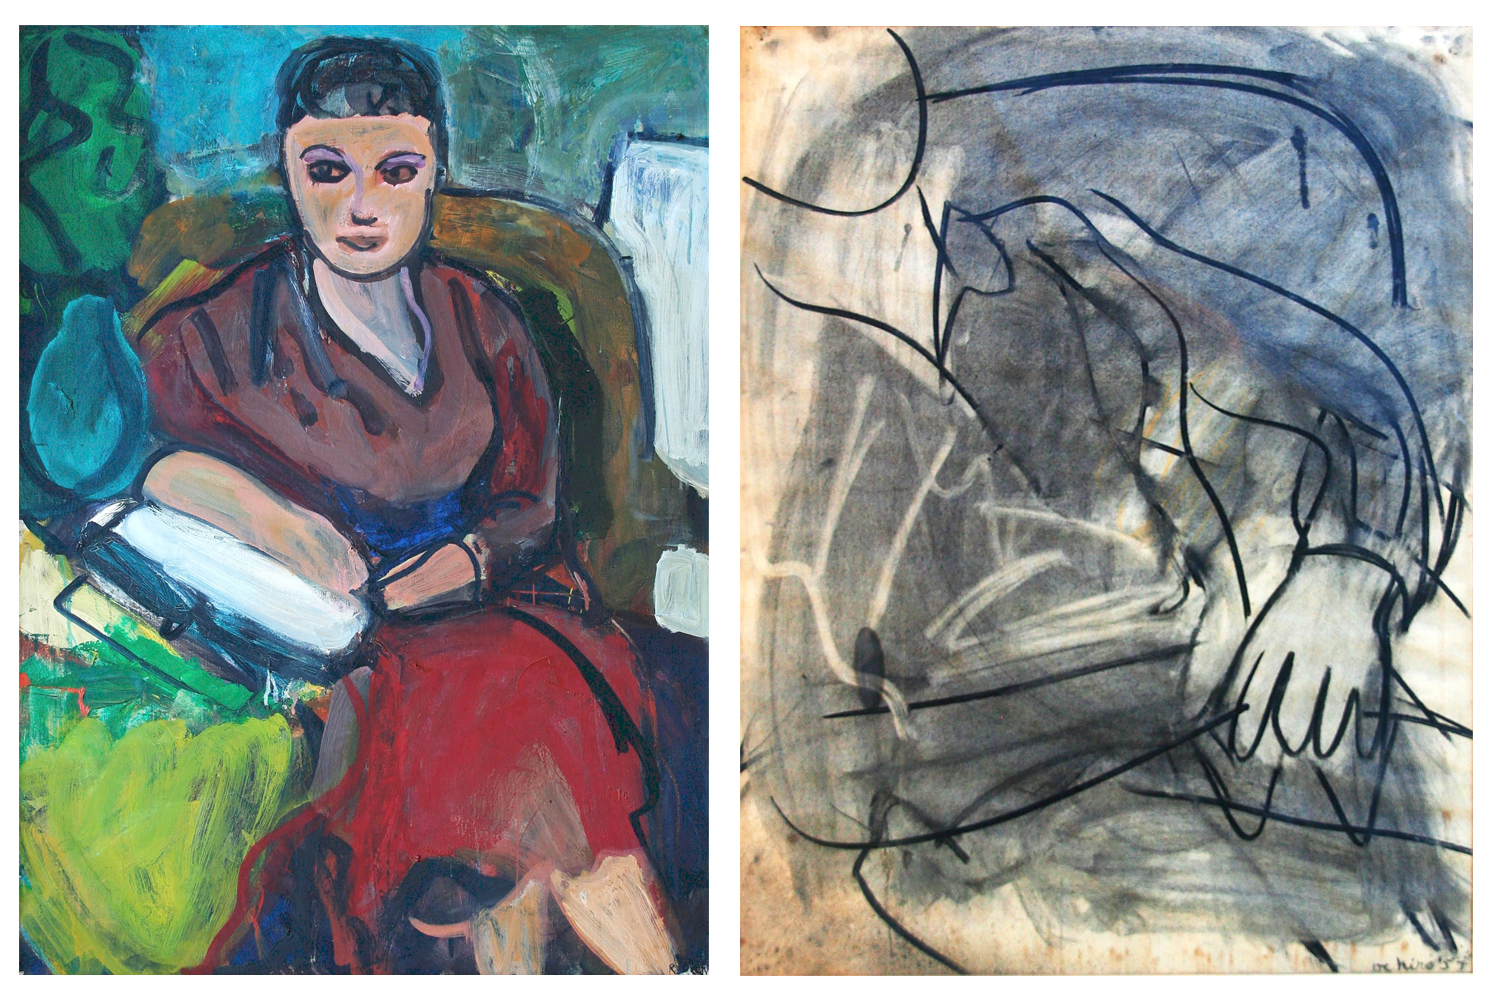 Two Robert De Niro Sr (1922-1993) pieces, “Portrait of a Seated Woman,” circa 1960, an oil on canvas, and “Seated Man,” 1957, charcoal on paper were bid to $8,400 and $2,160, respectively.